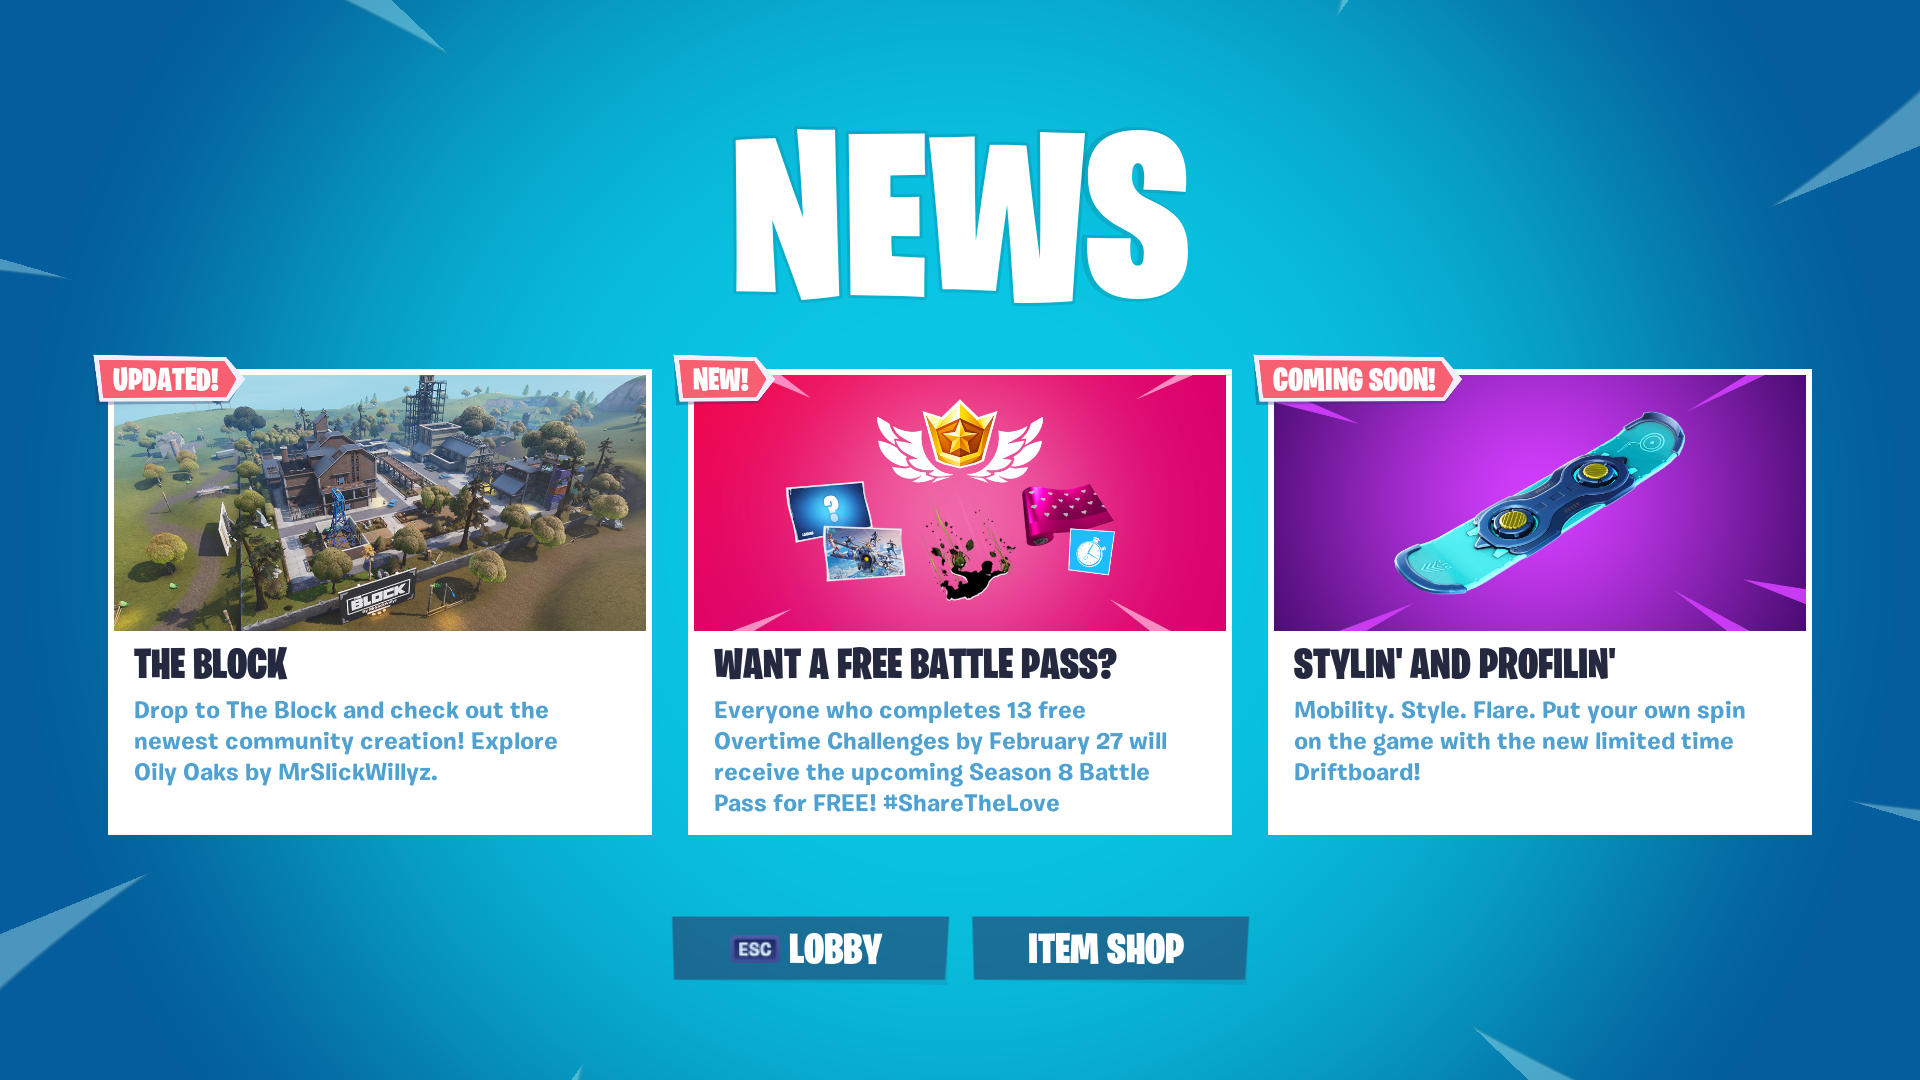 psa fortnite v7 40 content update arrives tomorrow morning fortnite news and statistics ss1 - whats in the fortnite store tomorrow